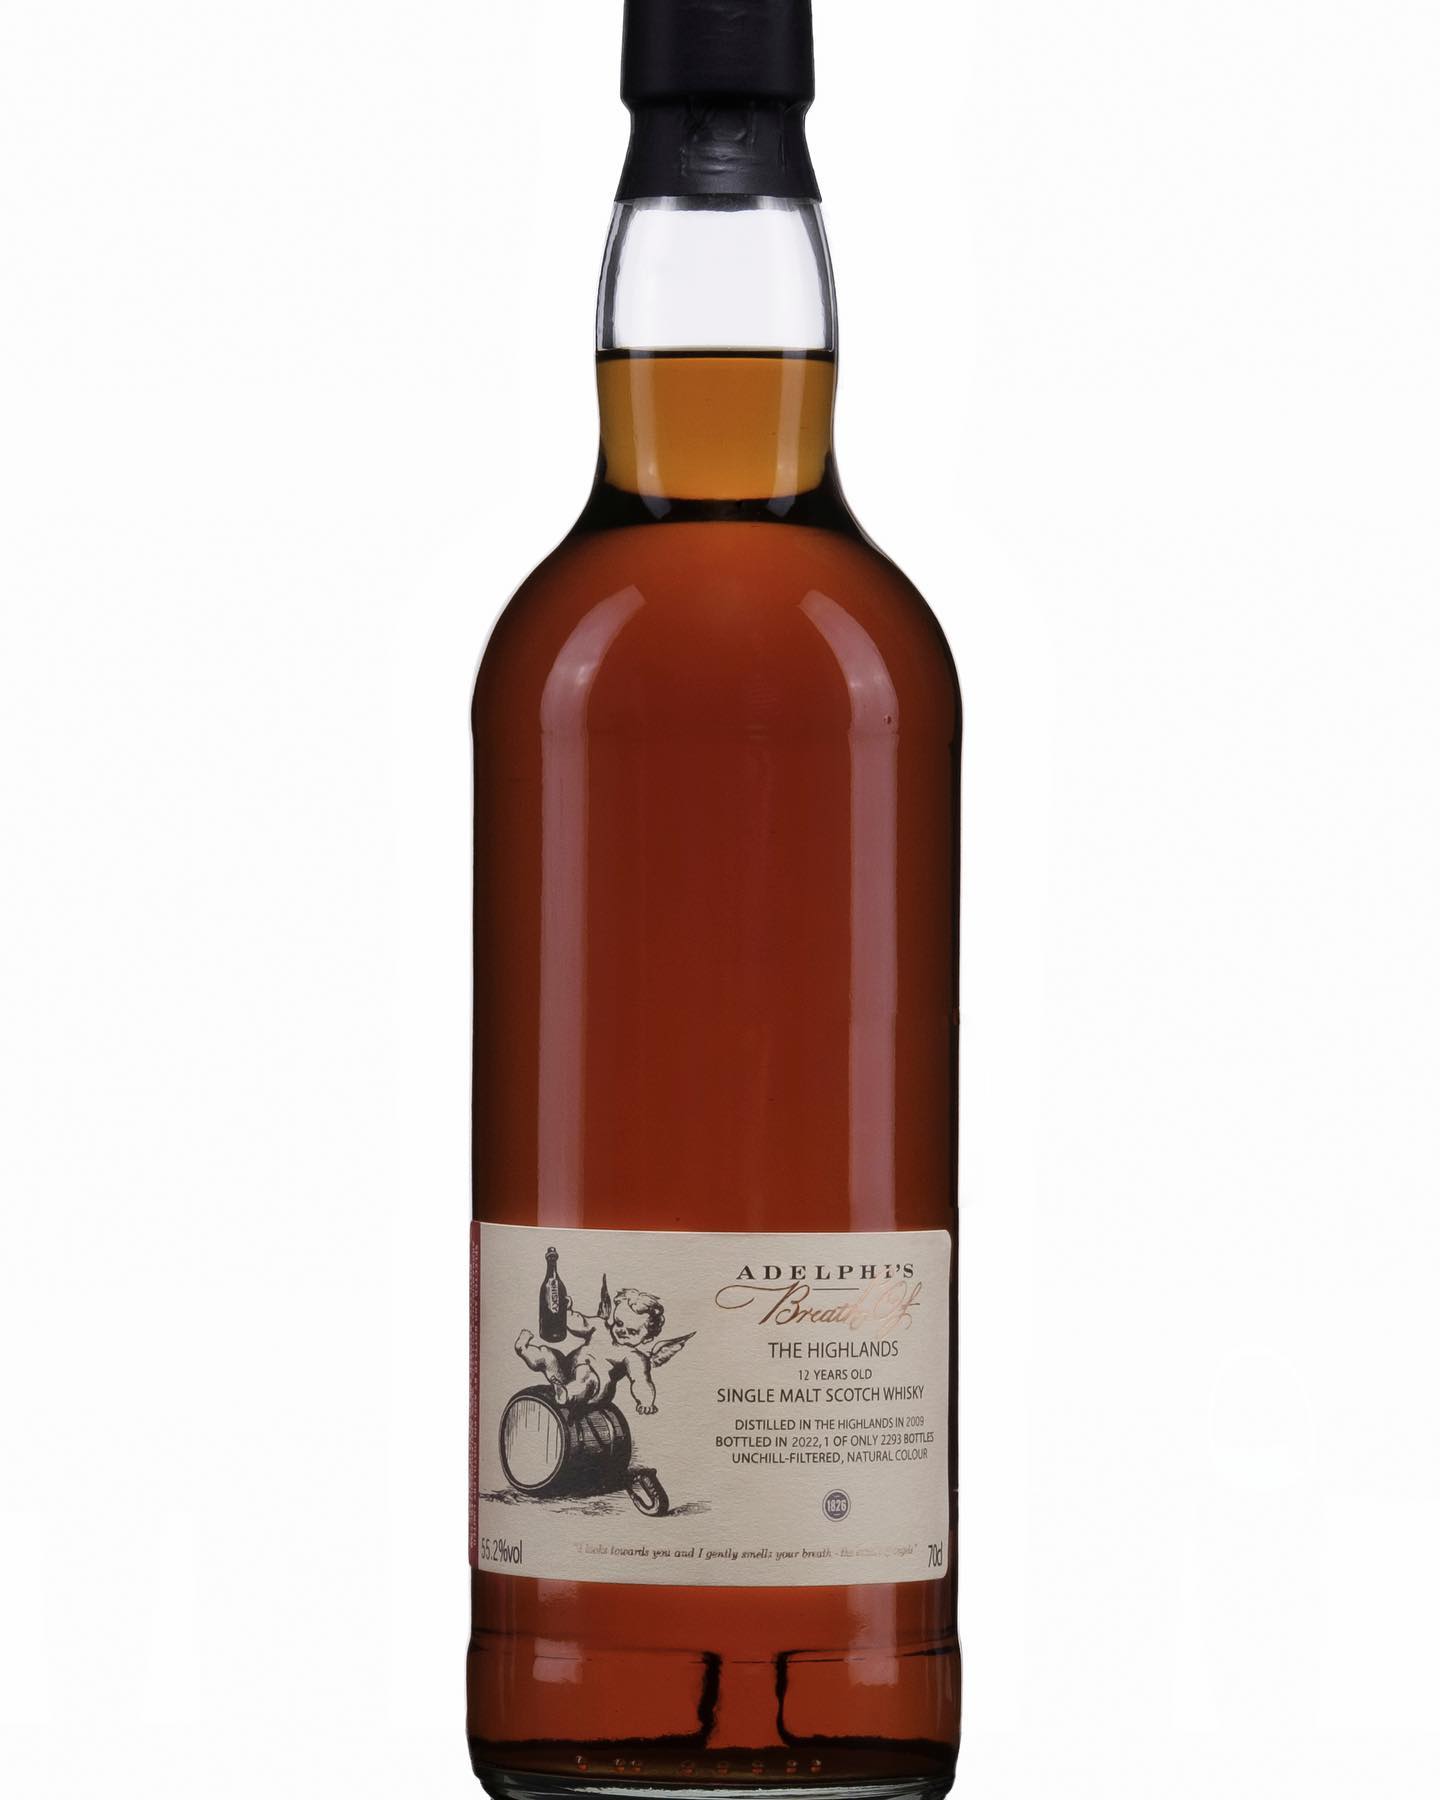 Breath of the Highlands 2009, 12 y.o. - First Fill Sherry Cask, 55,2% Alc.Vol., Adelphi